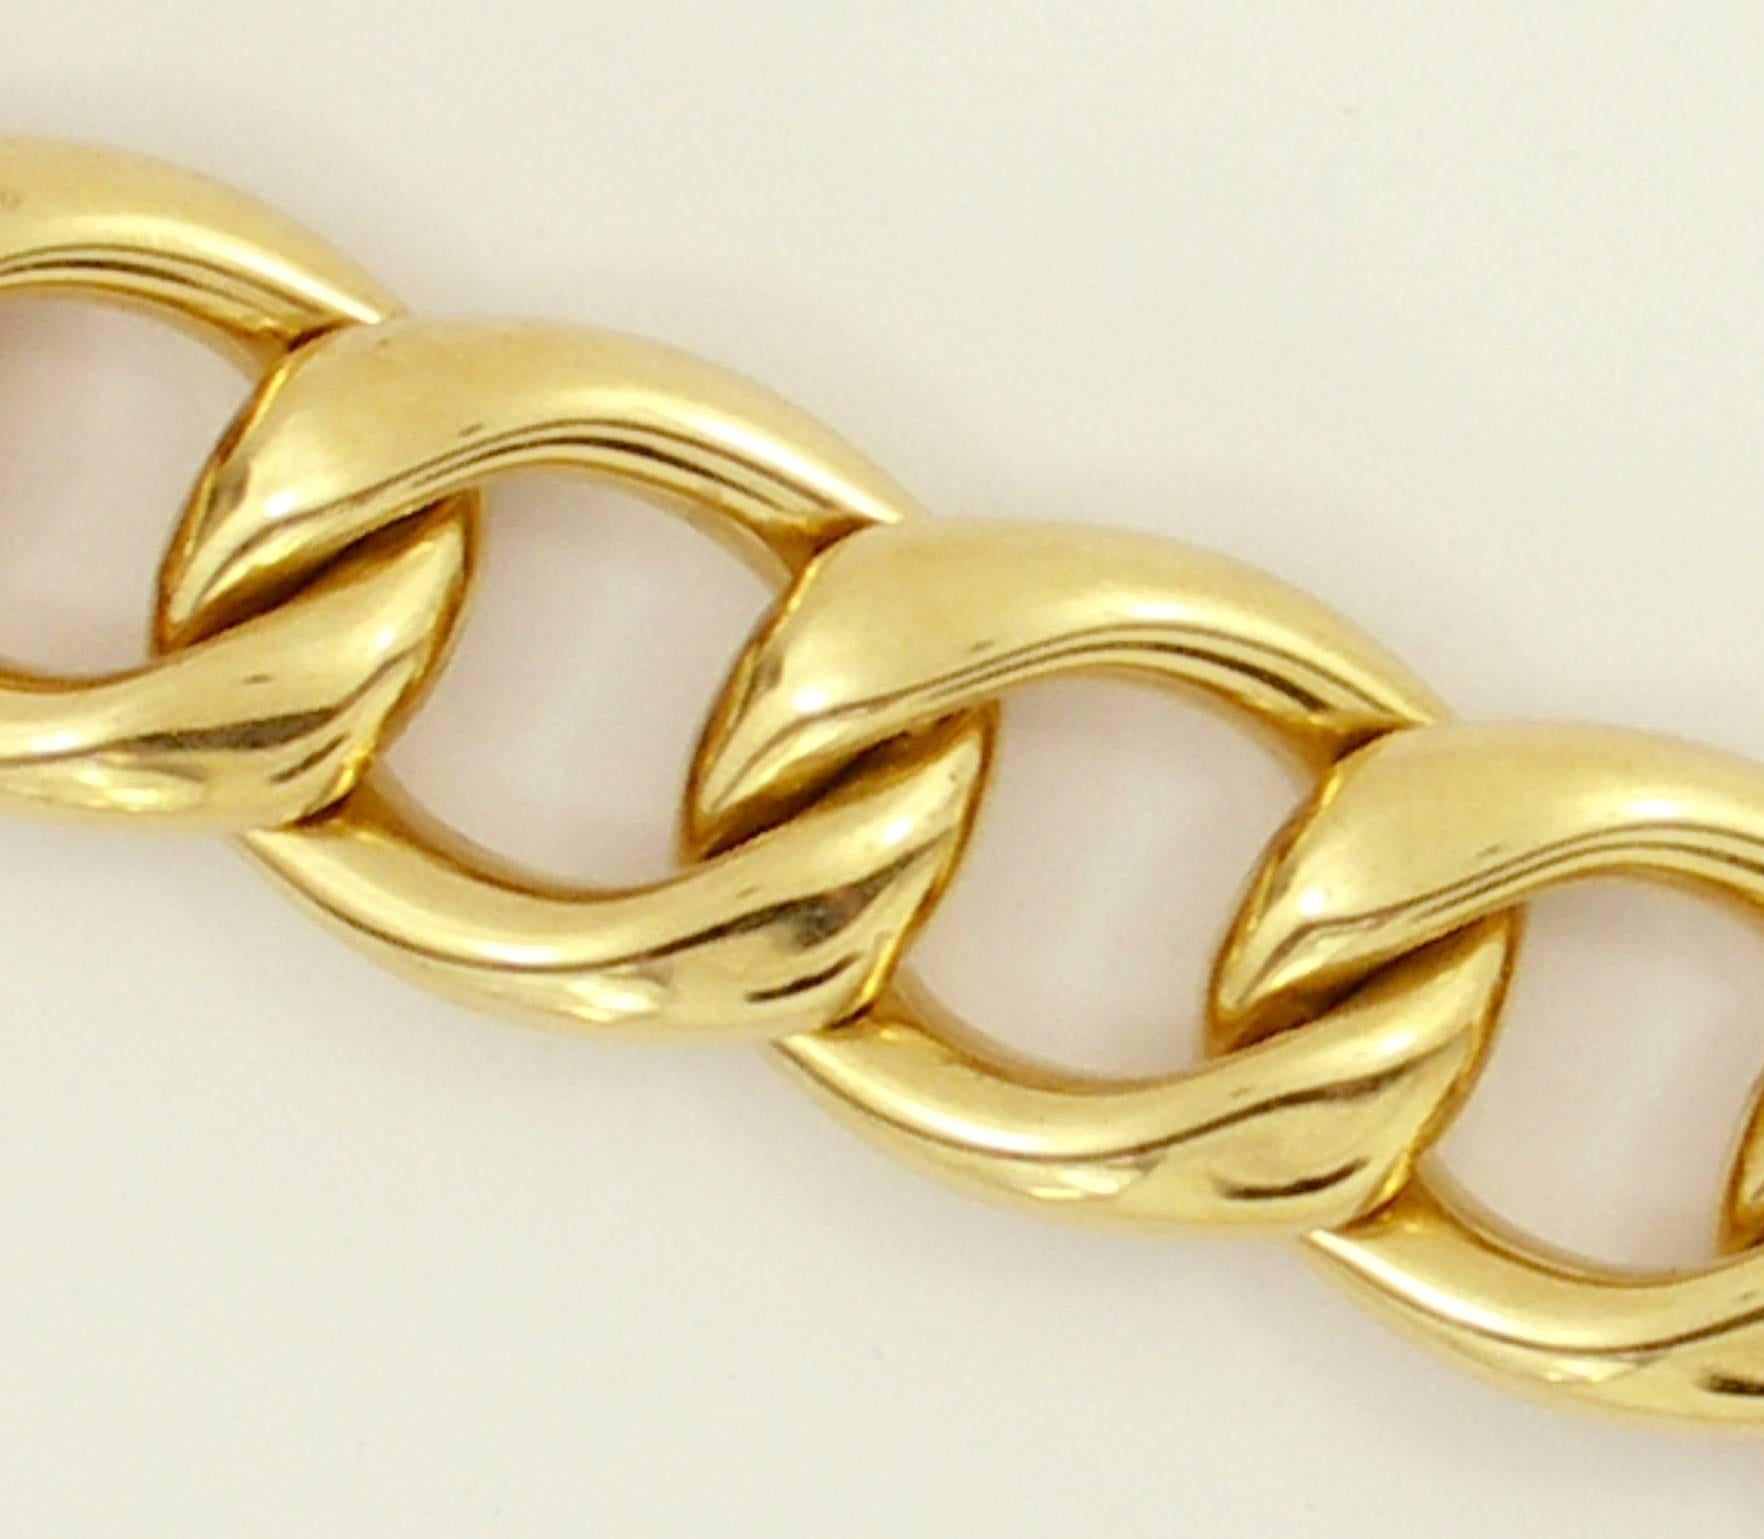 Women's or Men's Gold Bracelet with Florentine and High Polished Links